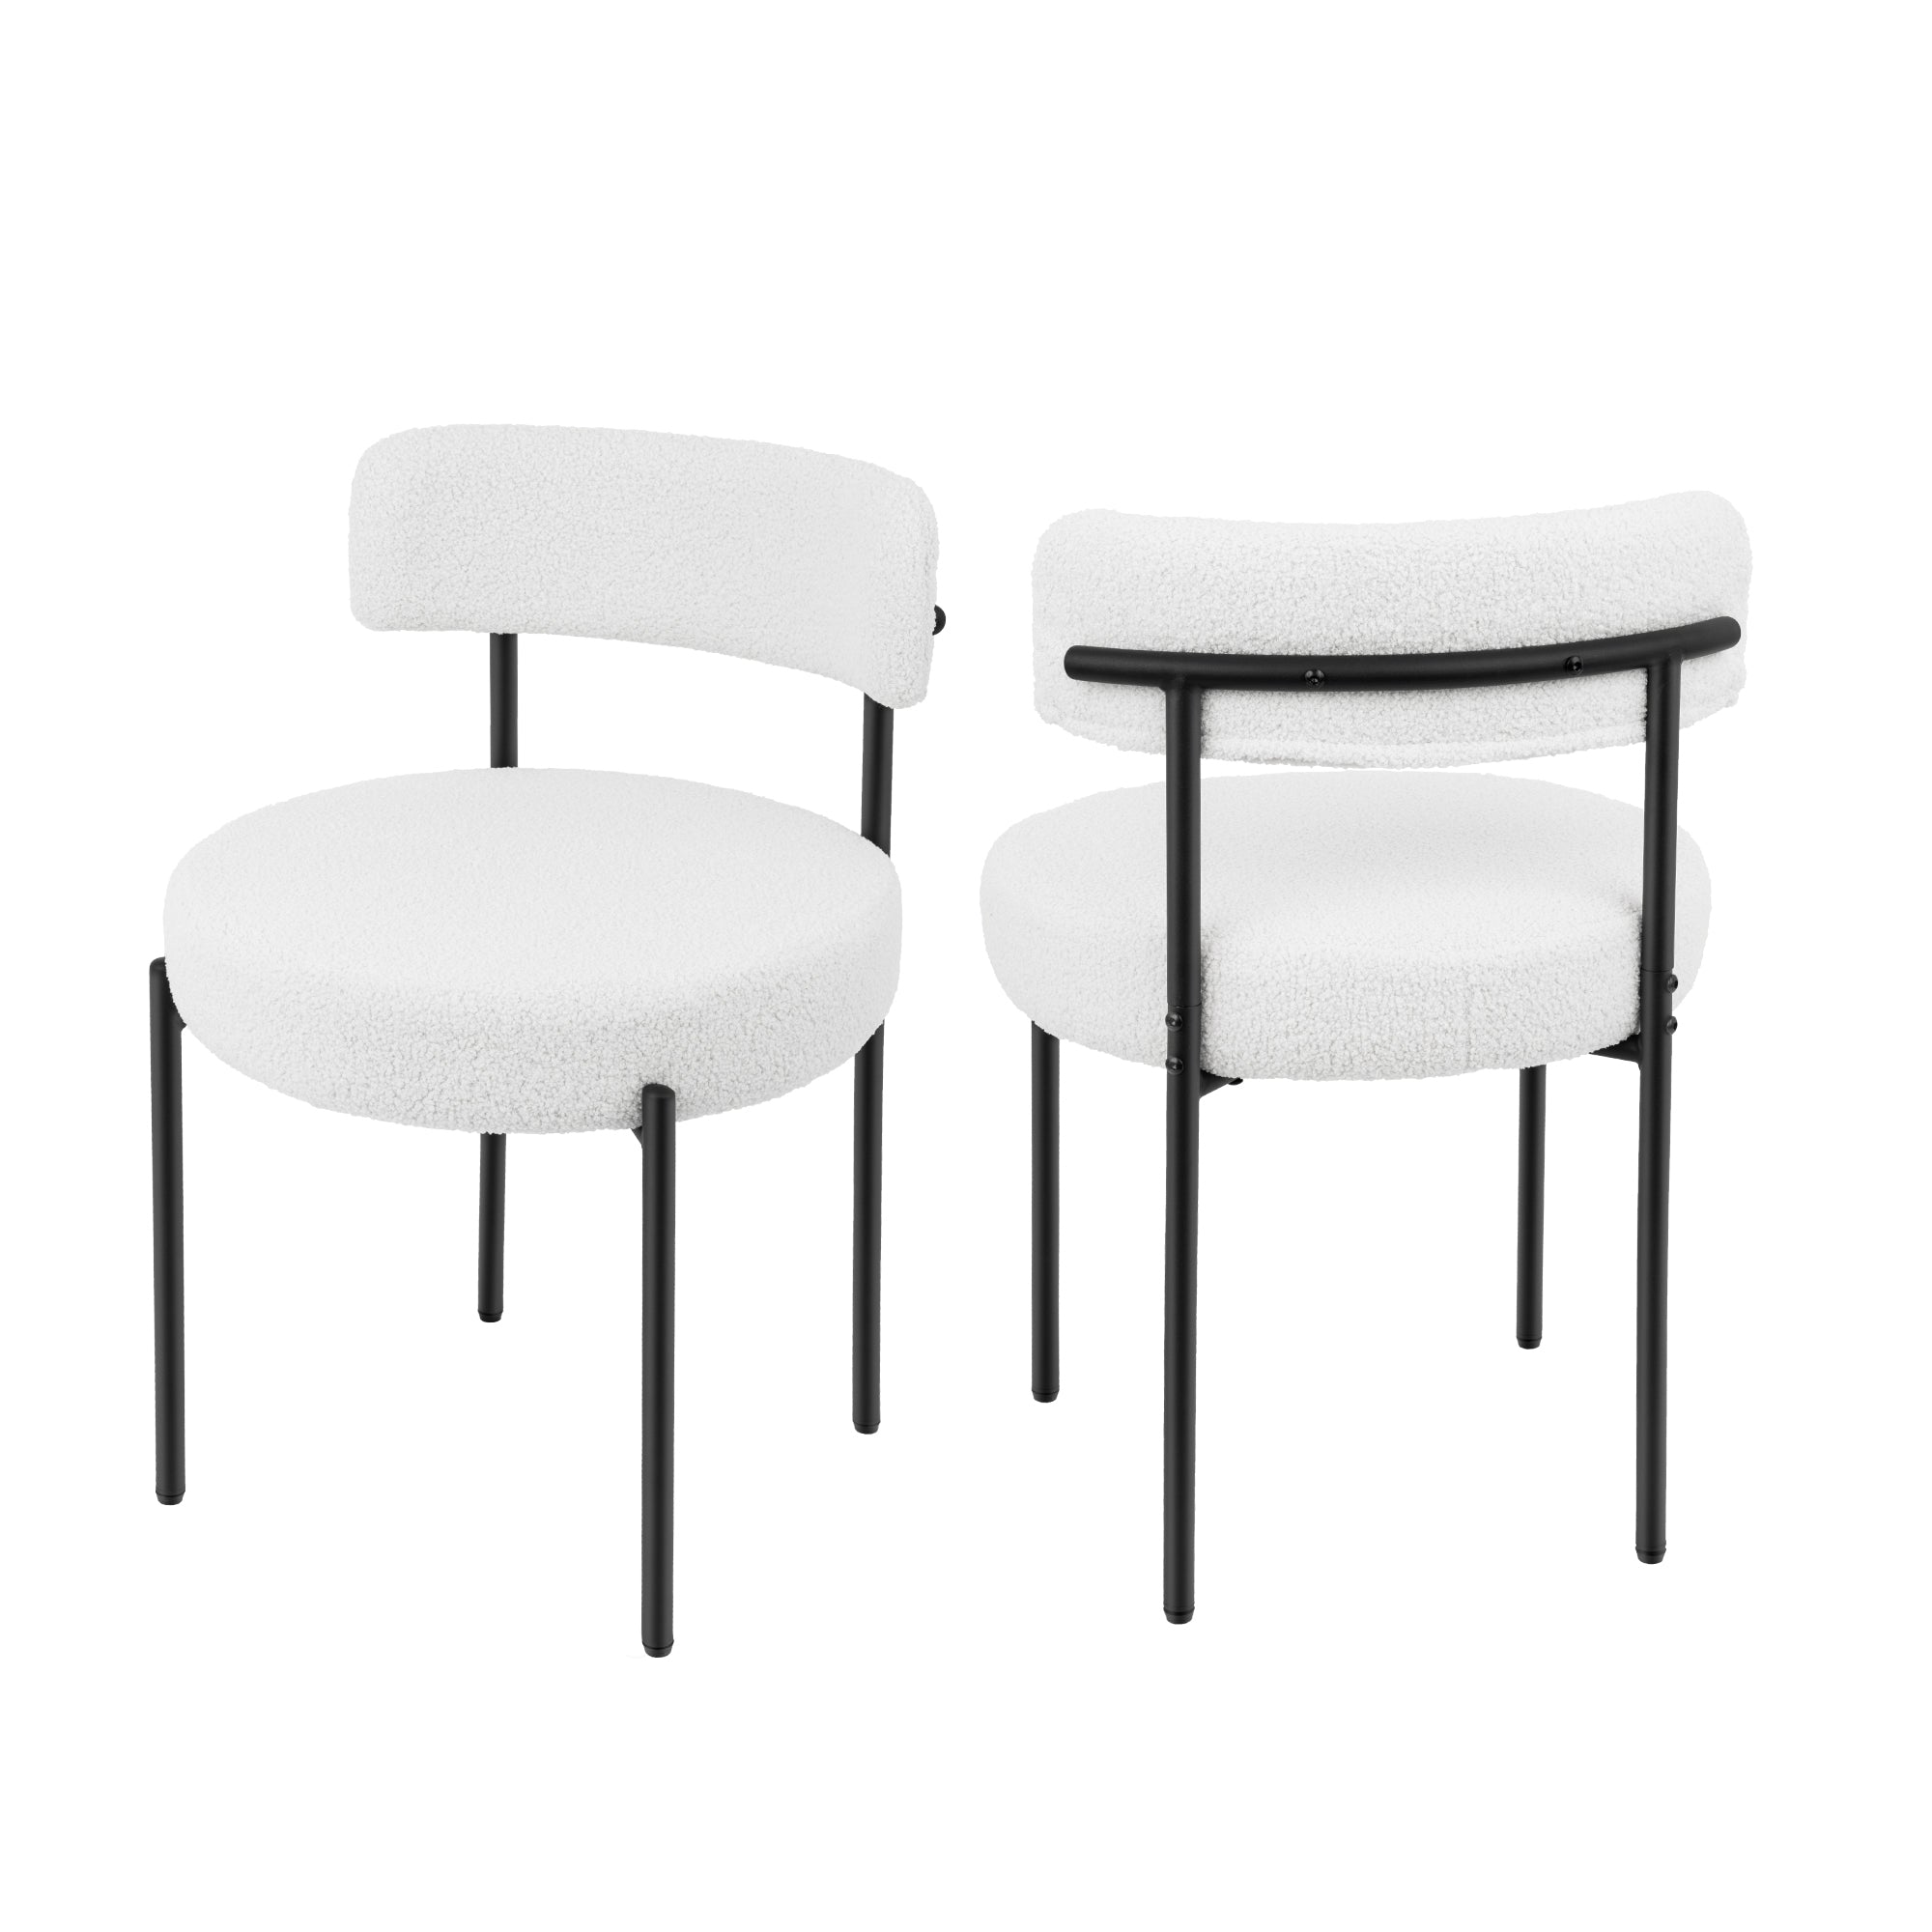 Upholstered Dining Chair Set With Backs